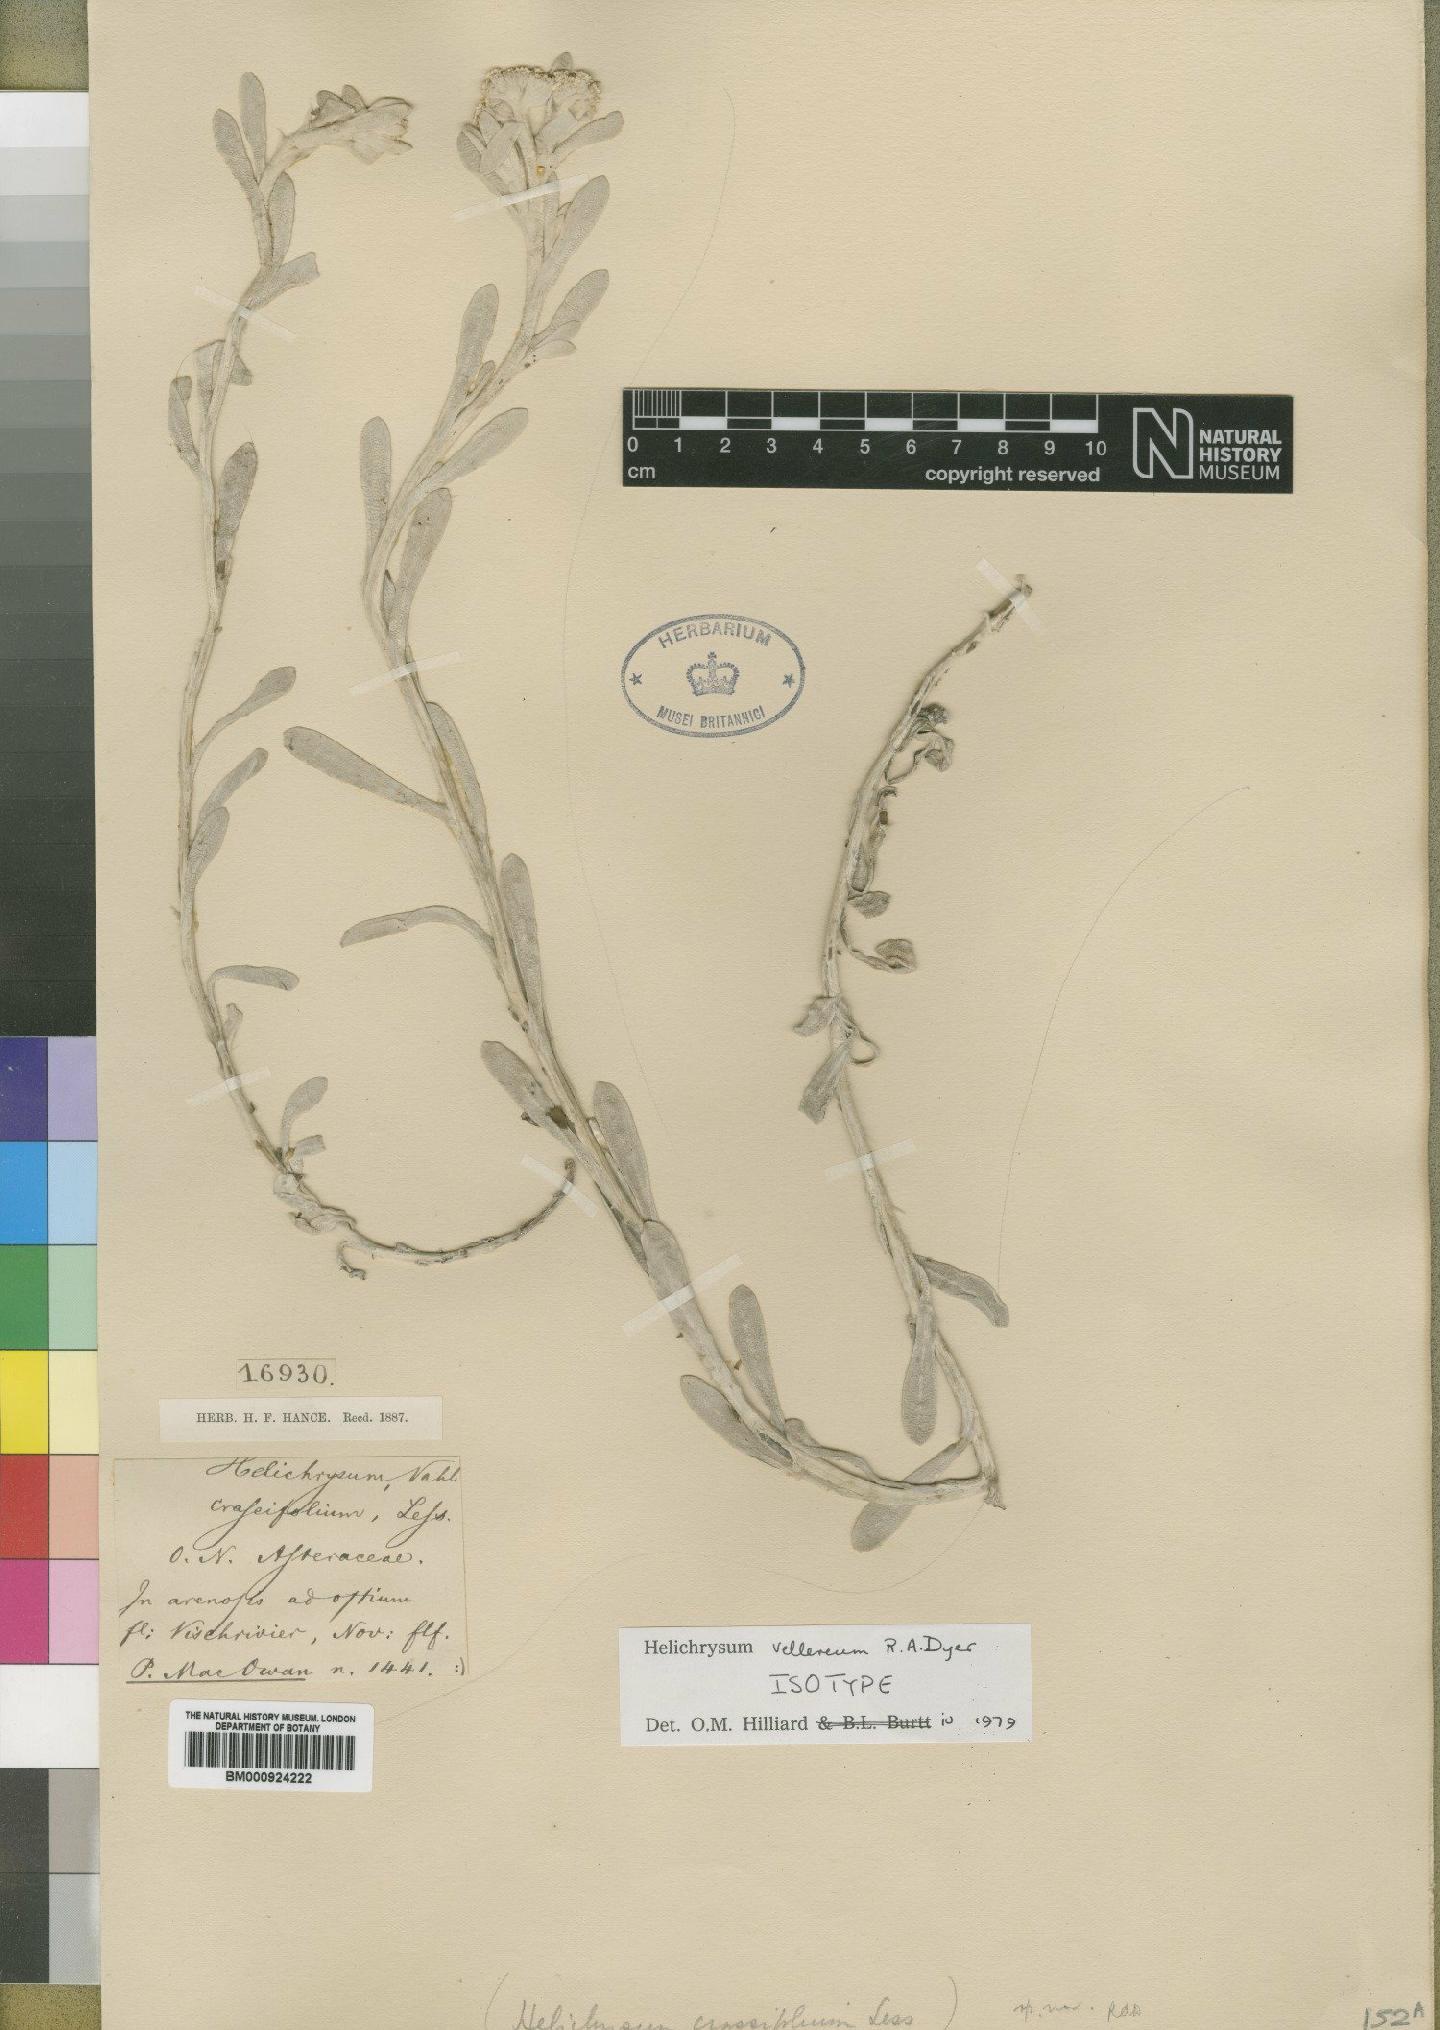 To NHMUK collection (Helichrysum vellereum Dyer; Isotype; NHMUK:ecatalogue:4529250)